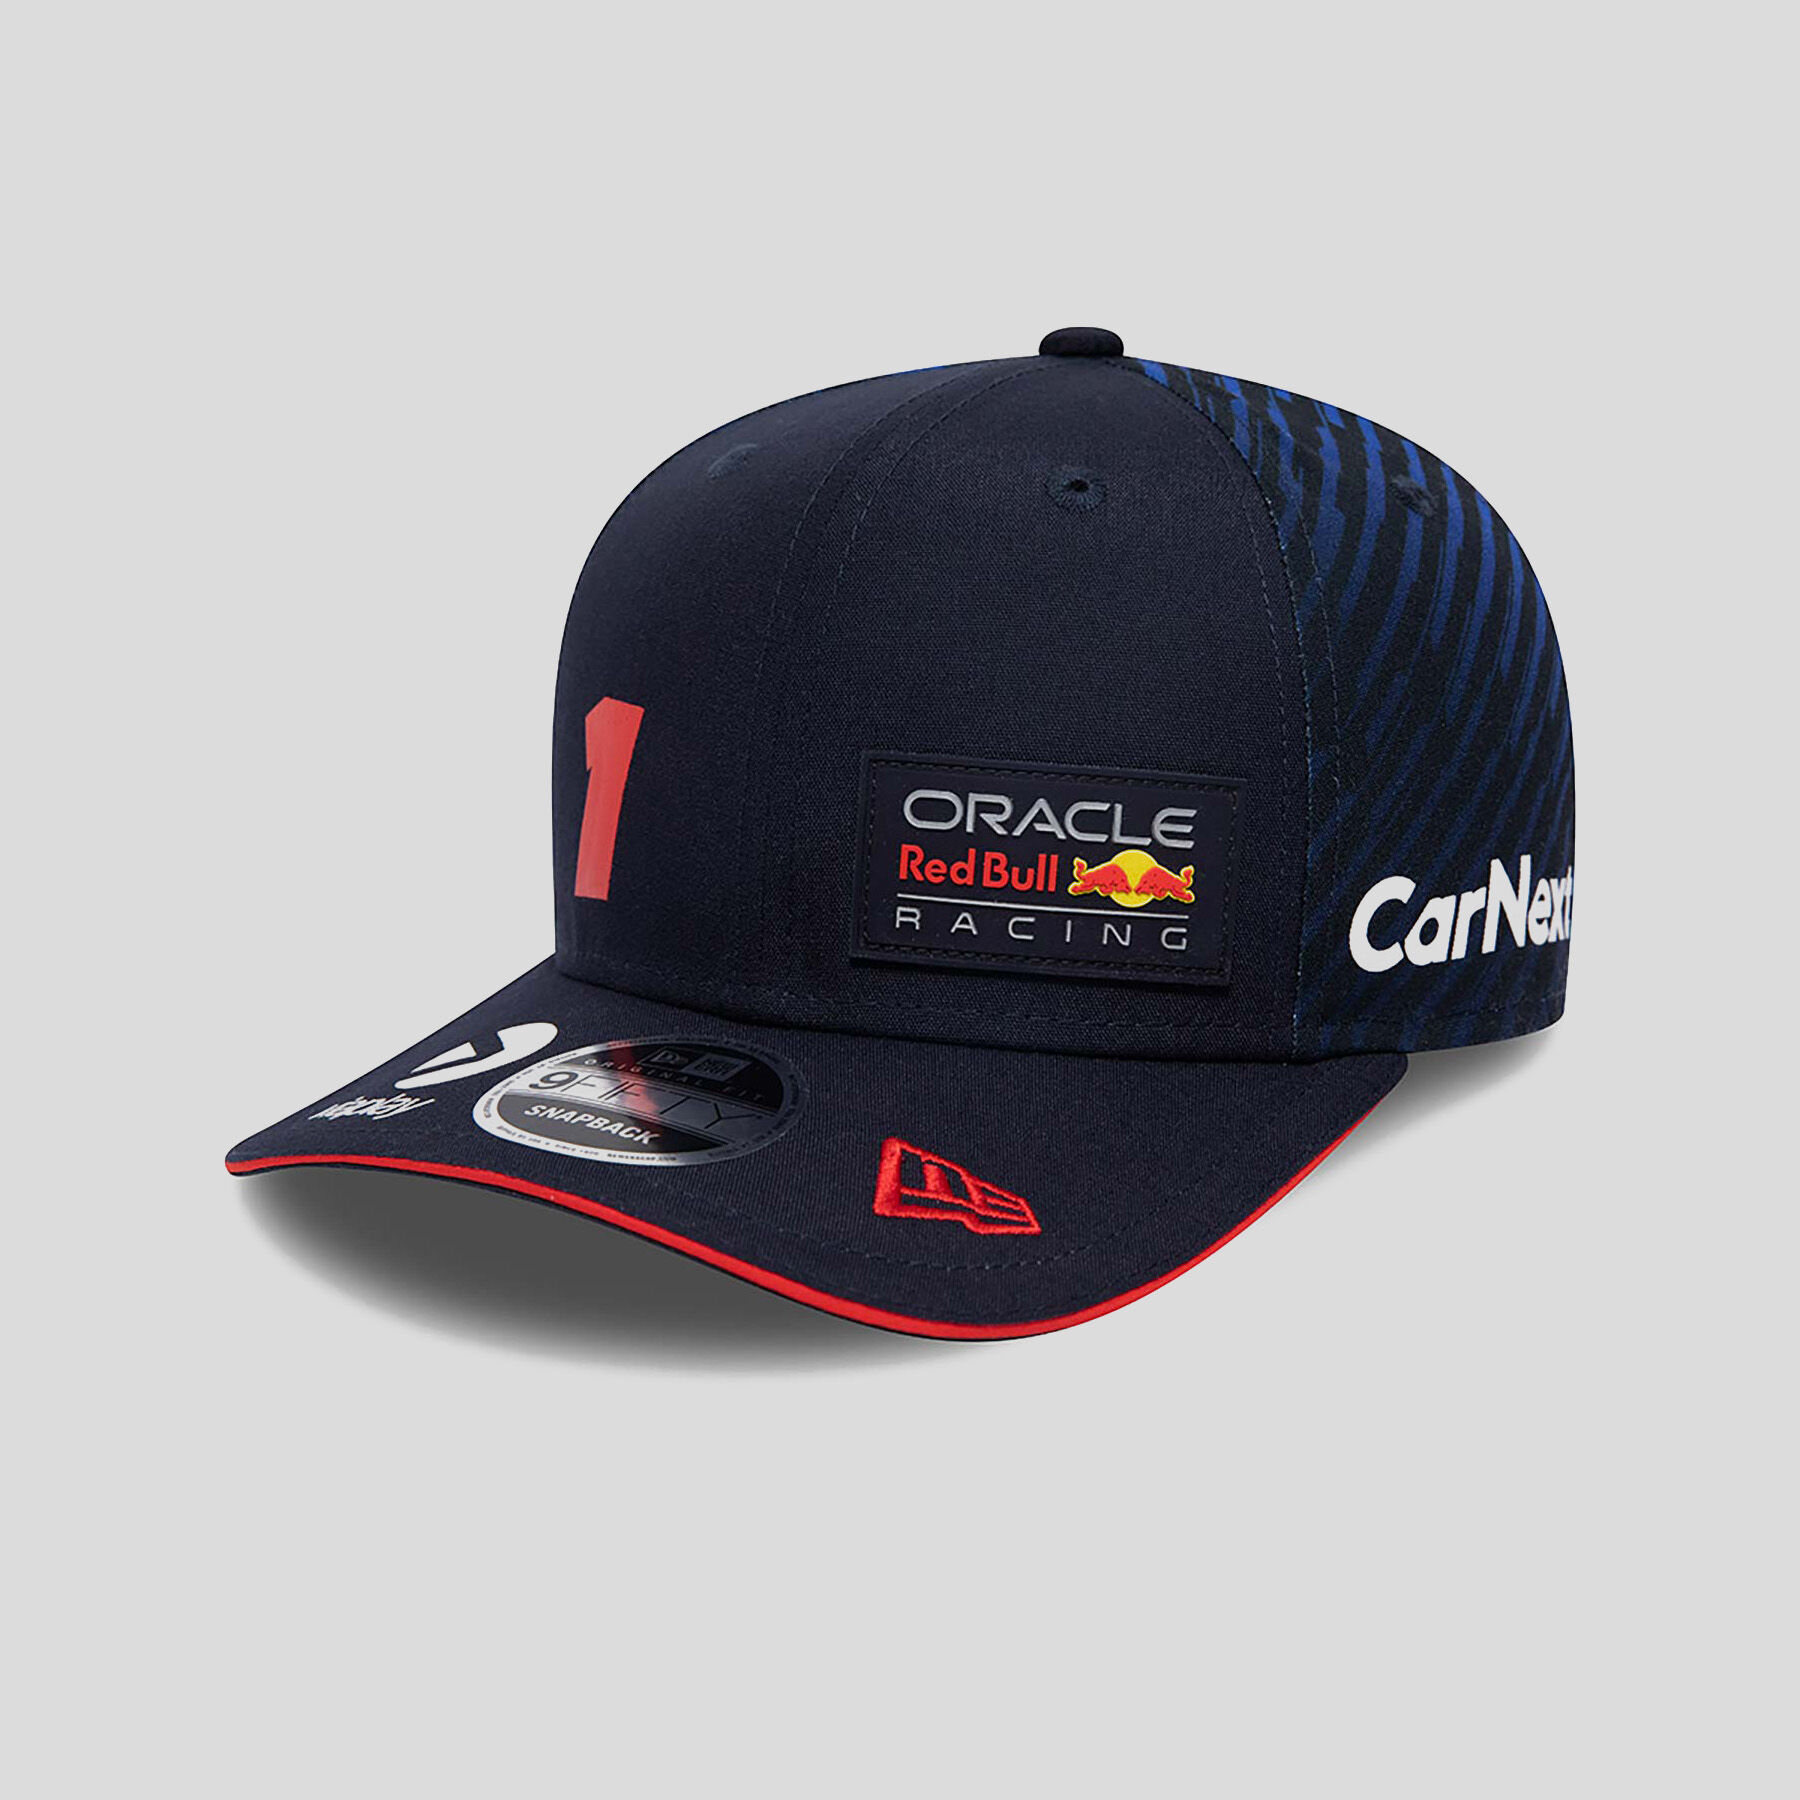 2023 Max Verstappen 9FIFTY Driver Hat - Red Bull Racing | Fuel For Fans